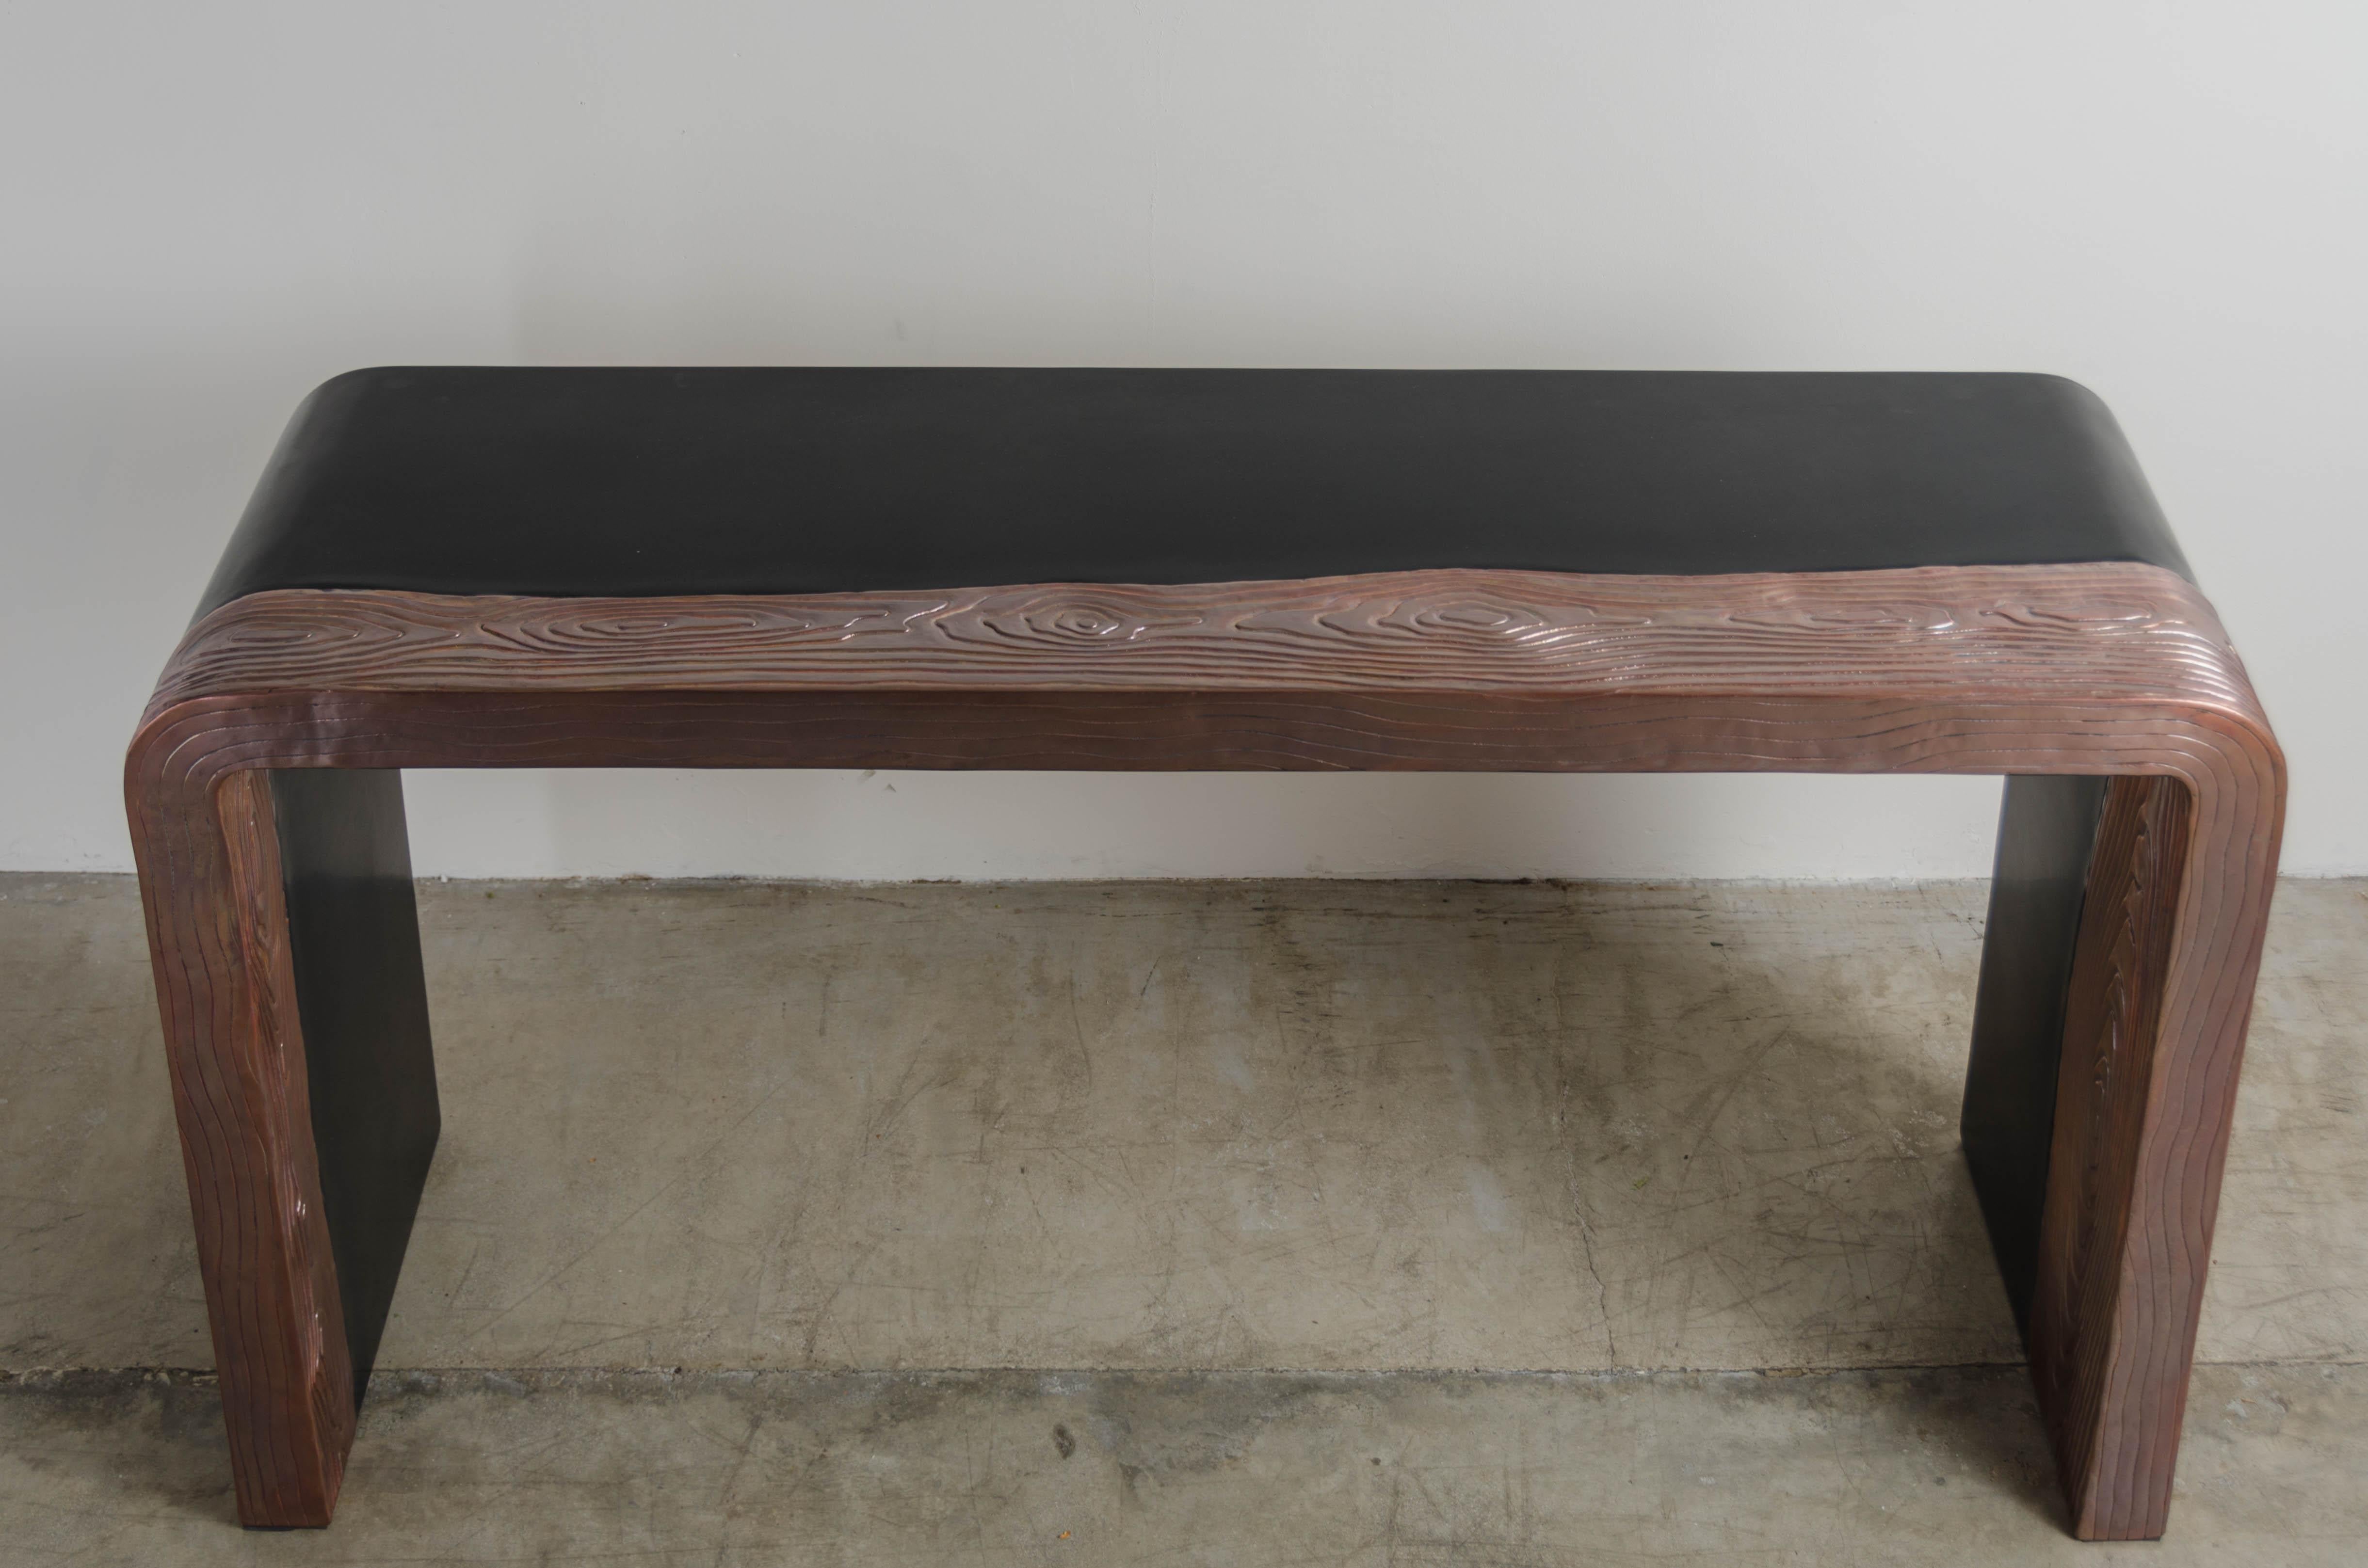 Woodgrain Design Copper Console with Black Lacquer by Robert Kuo, Hand Repousse For Sale 1